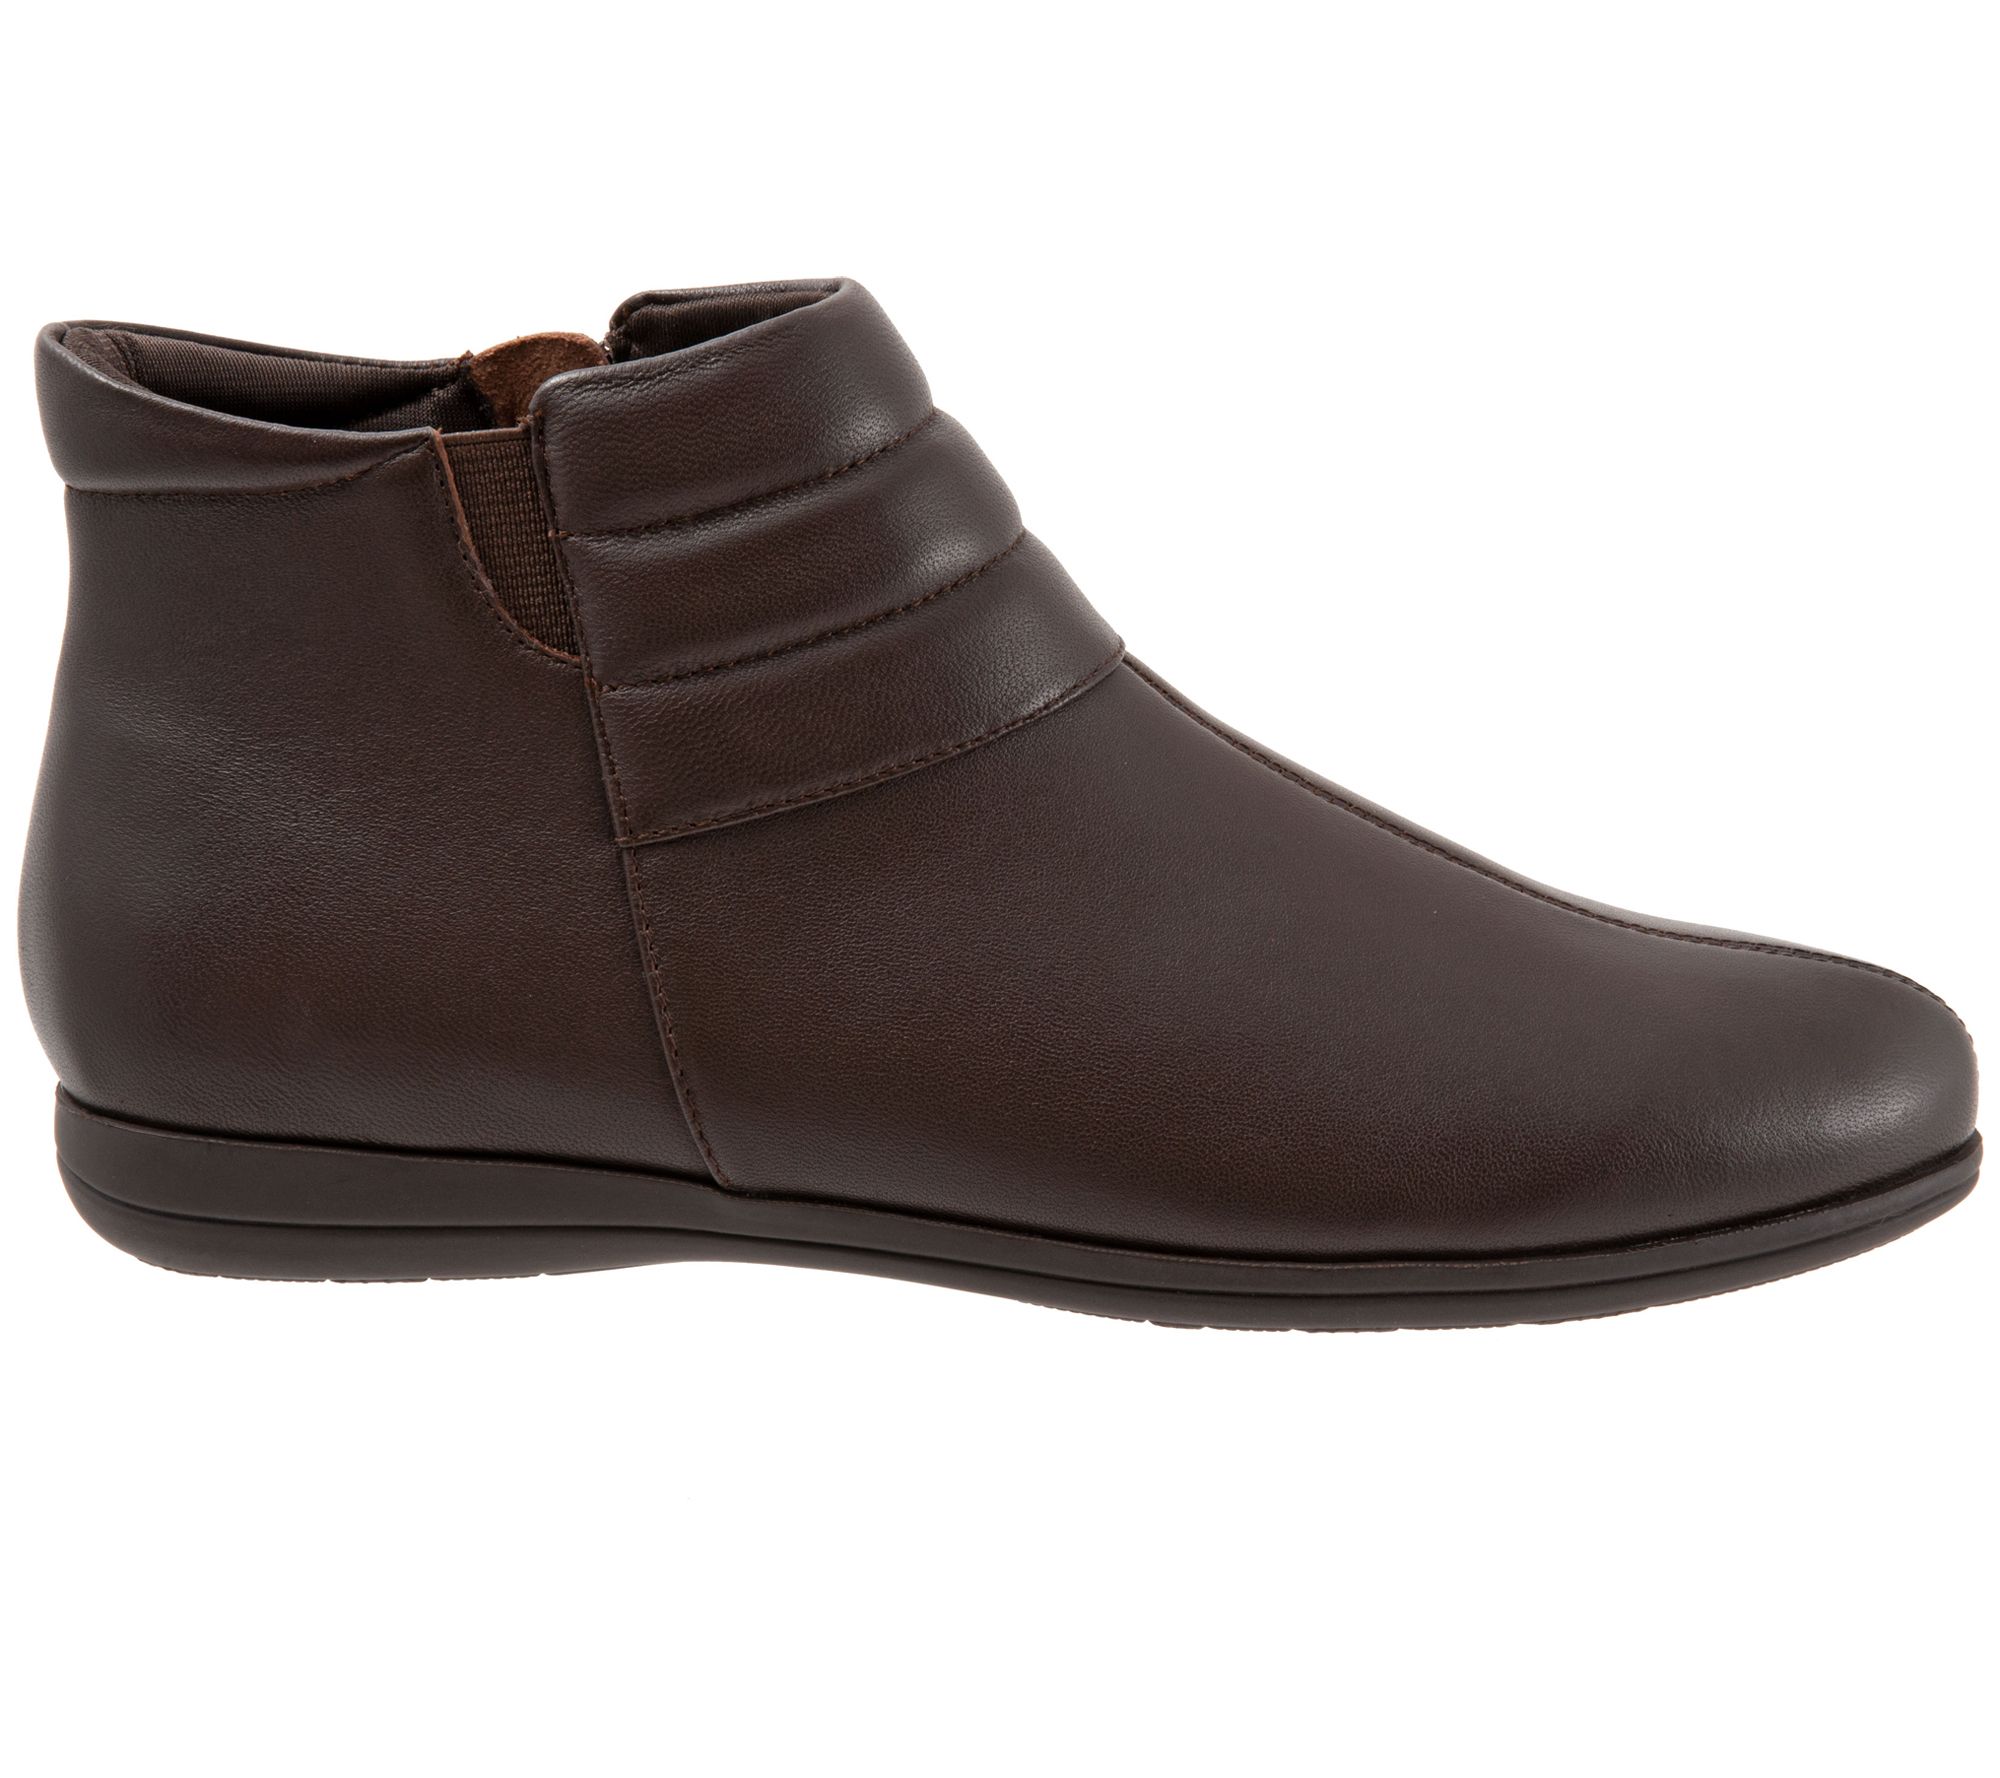 Trotters Leather Side-Zip Comfort Booties - Dory - QVC.com